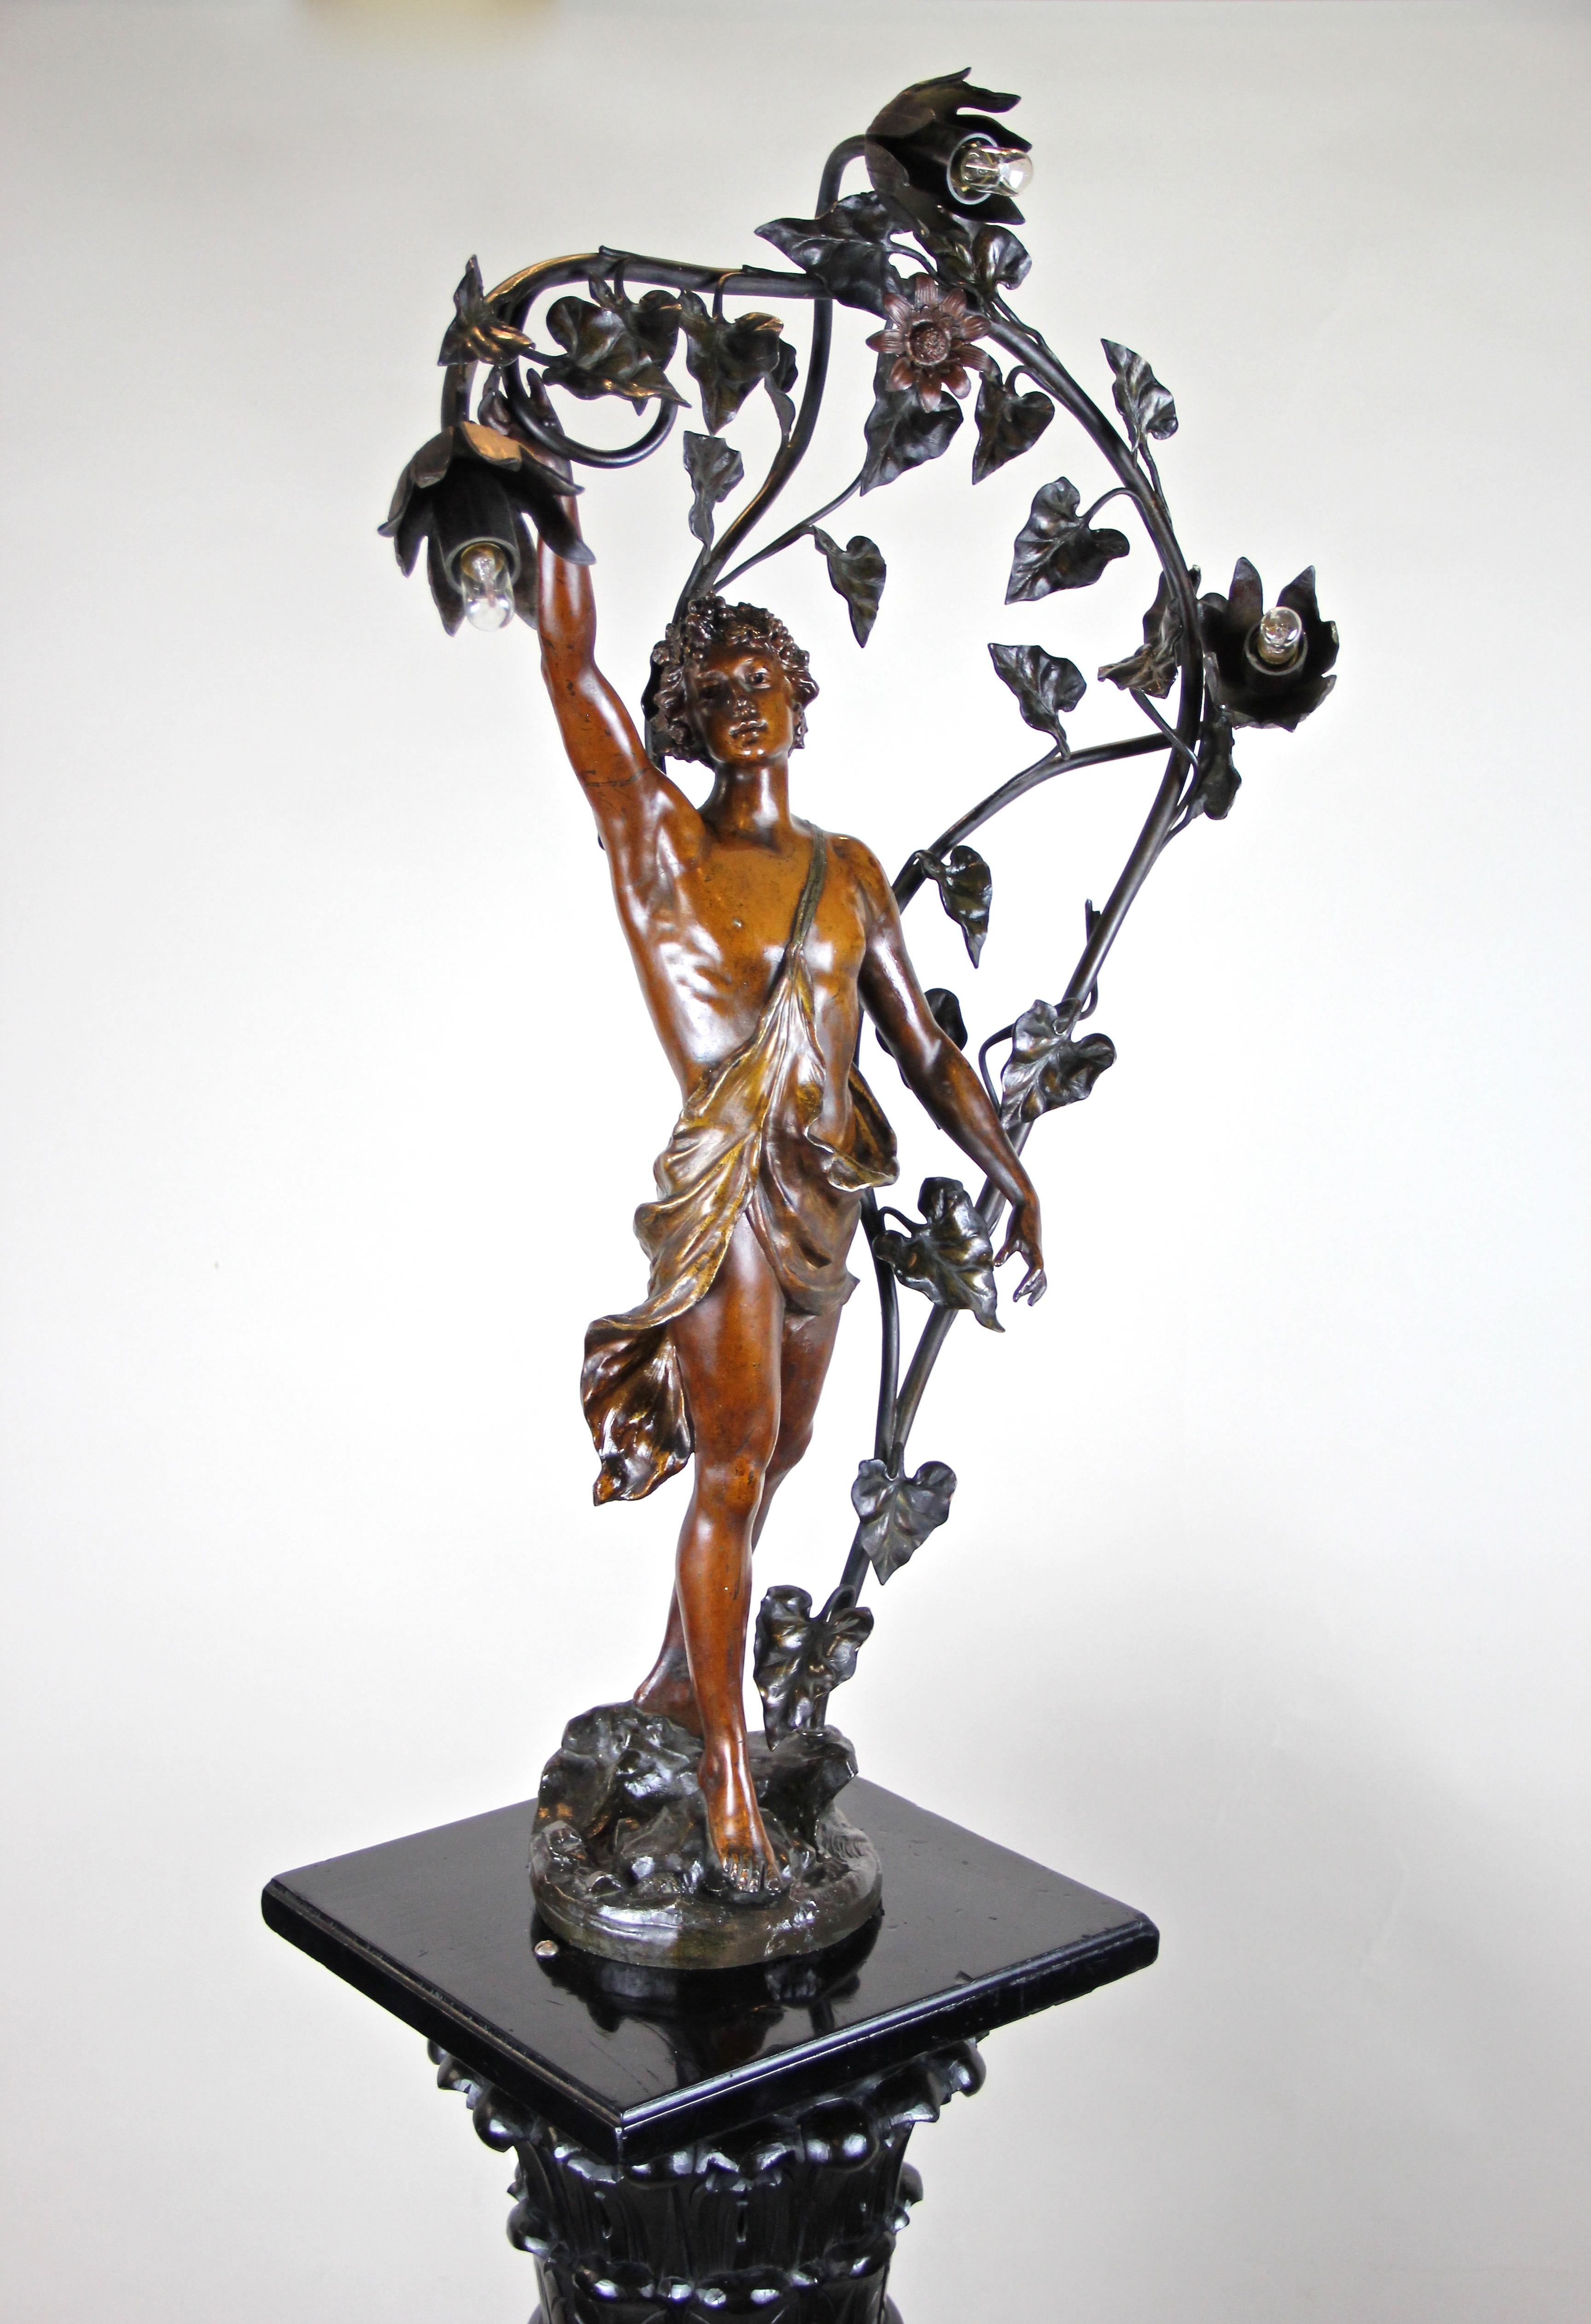 Remarkable Art Nouveau column lamp out of Austria from circa 1900, the renown Art Nouveau era. This early 20th century lamp consists of a beautifully carved ebonized wooden pedestal/ column showing a hand polished shellac finish - the base - and